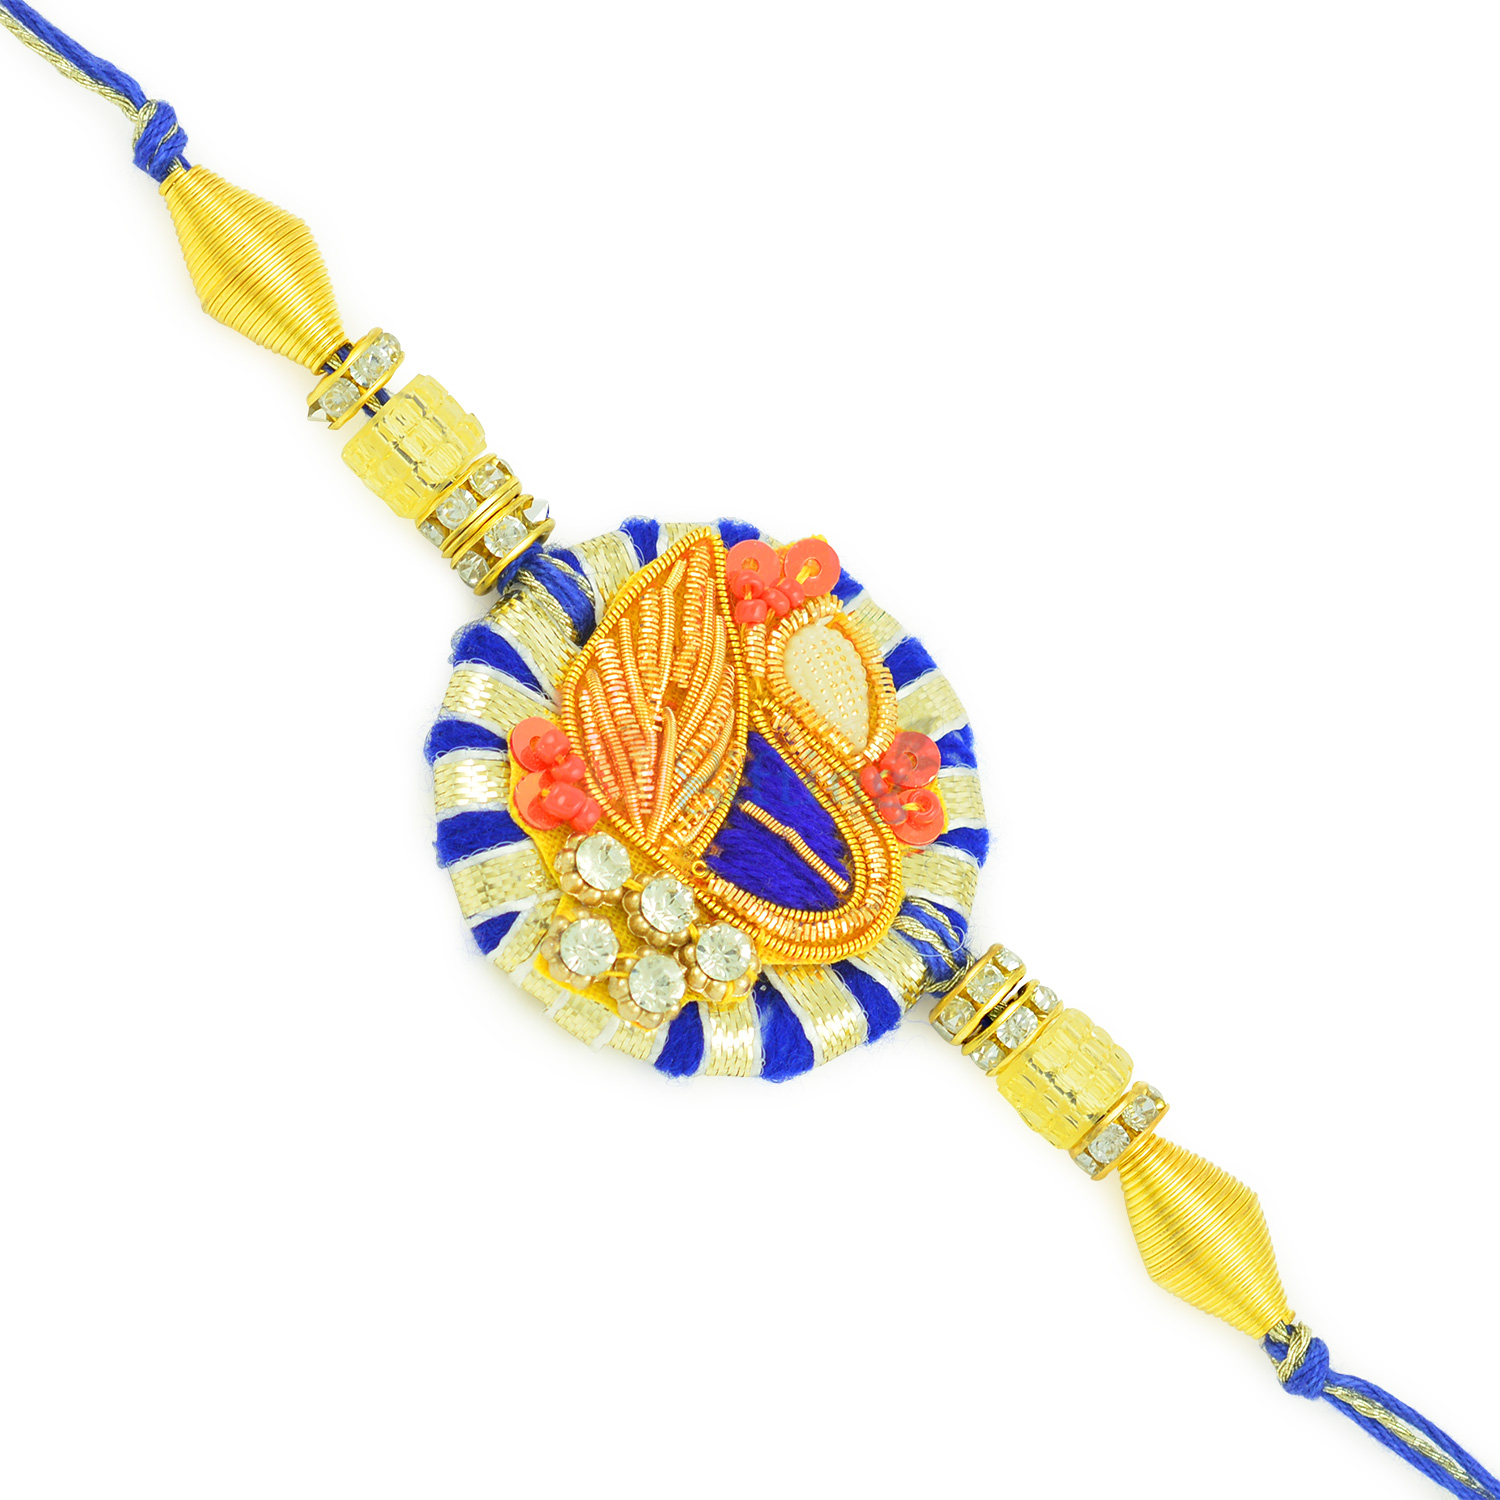 Wired Designed Beads with Rajasthani Look Colorful Round Rakhi